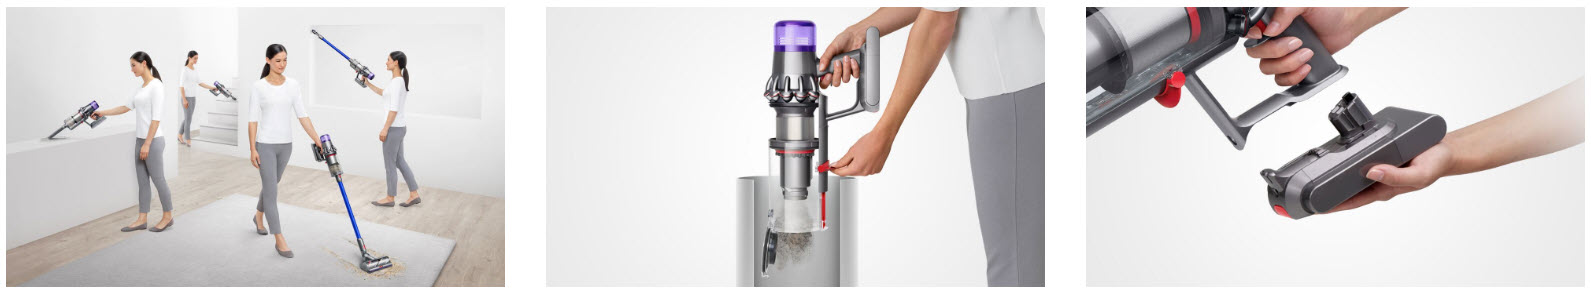 Cleaning Products Affiliate Programs - dyson stripe